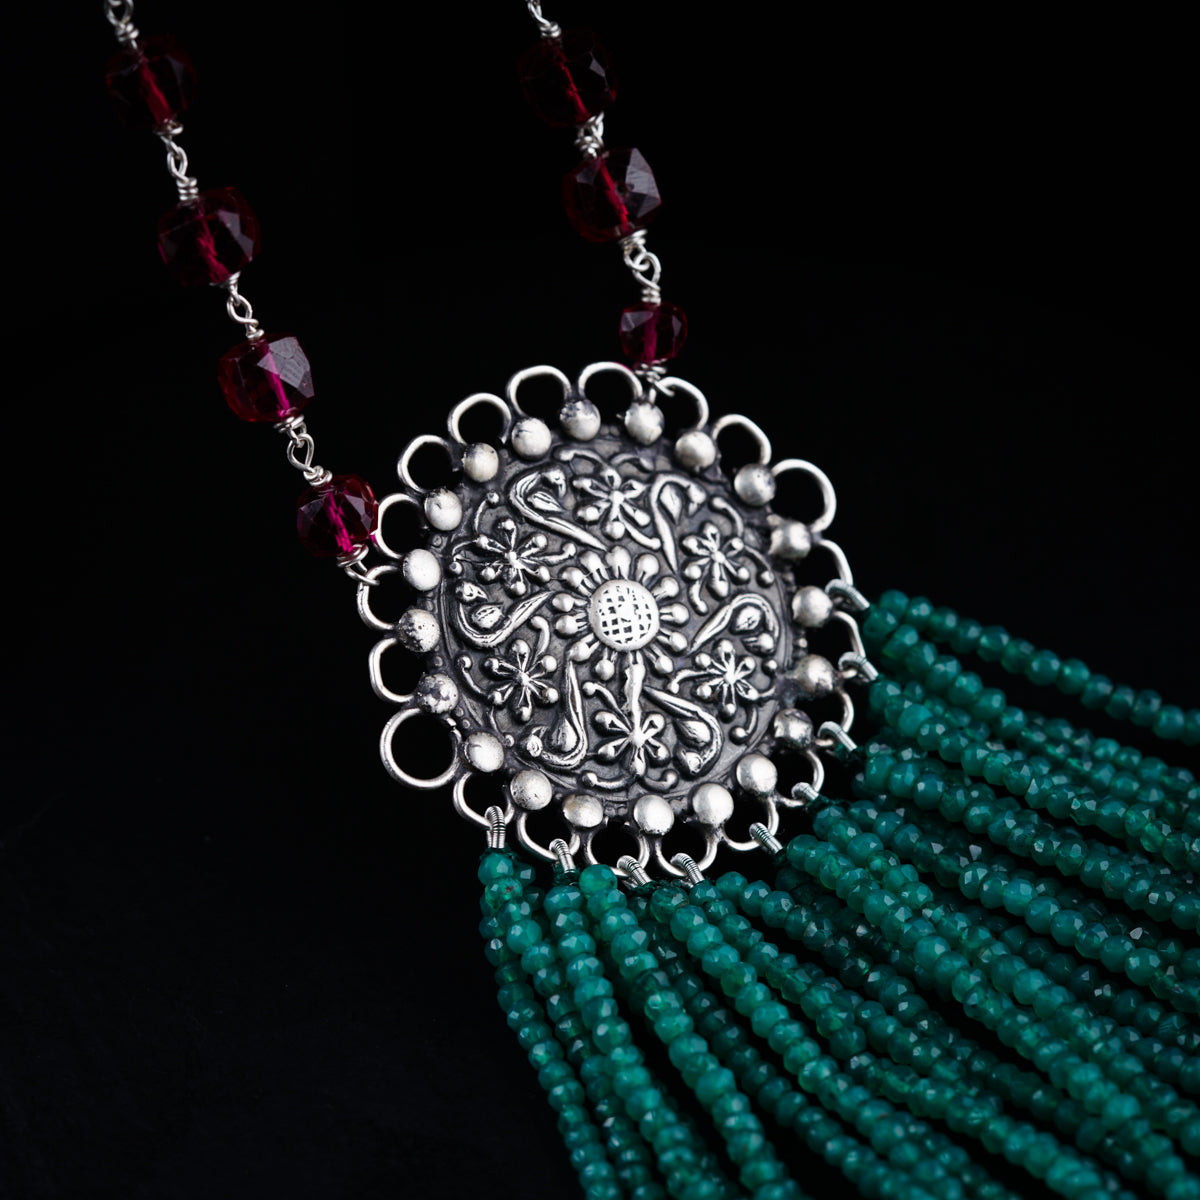 a close up of a necklace on a black background